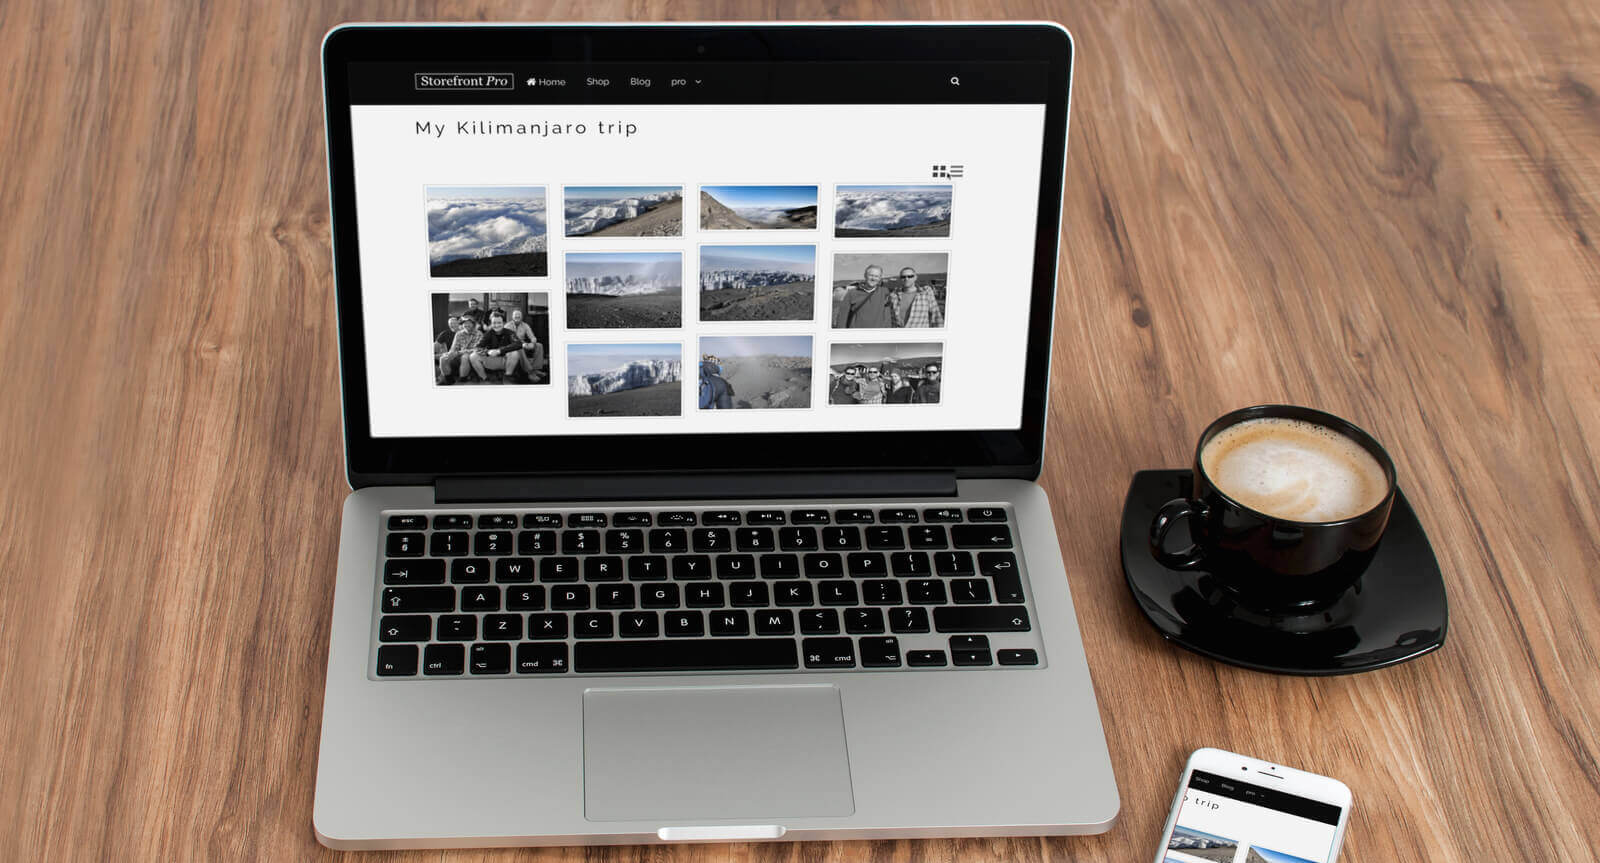 How to create an unsplash.com style photo gallery